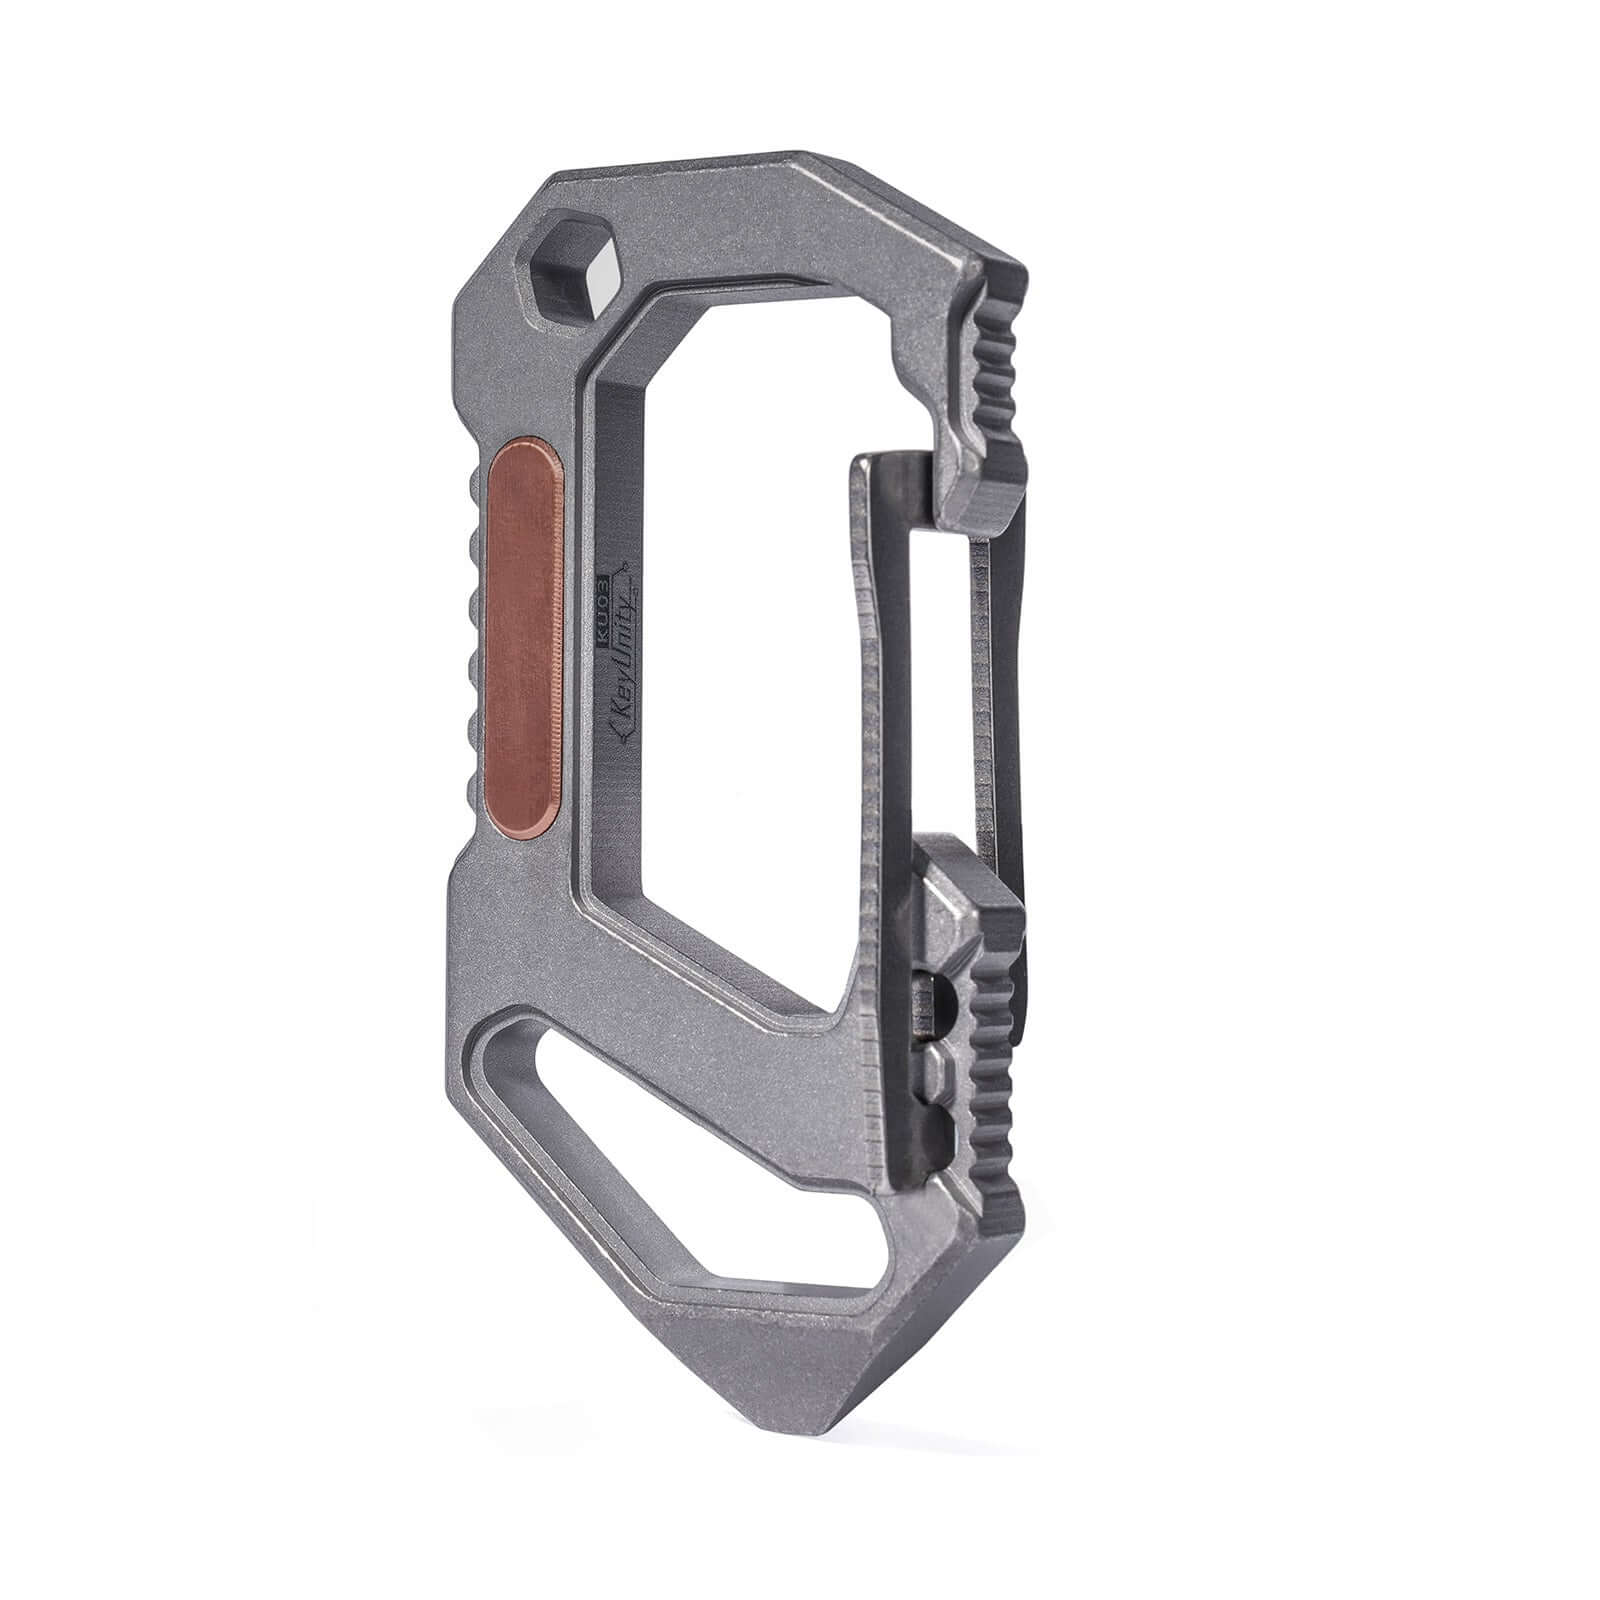 Multi Functional EDC Edc Keychain Carabiner With Folding Knife And Scalpel  Cutter For Outdoor Camping From Edctoolsplay, $14.03